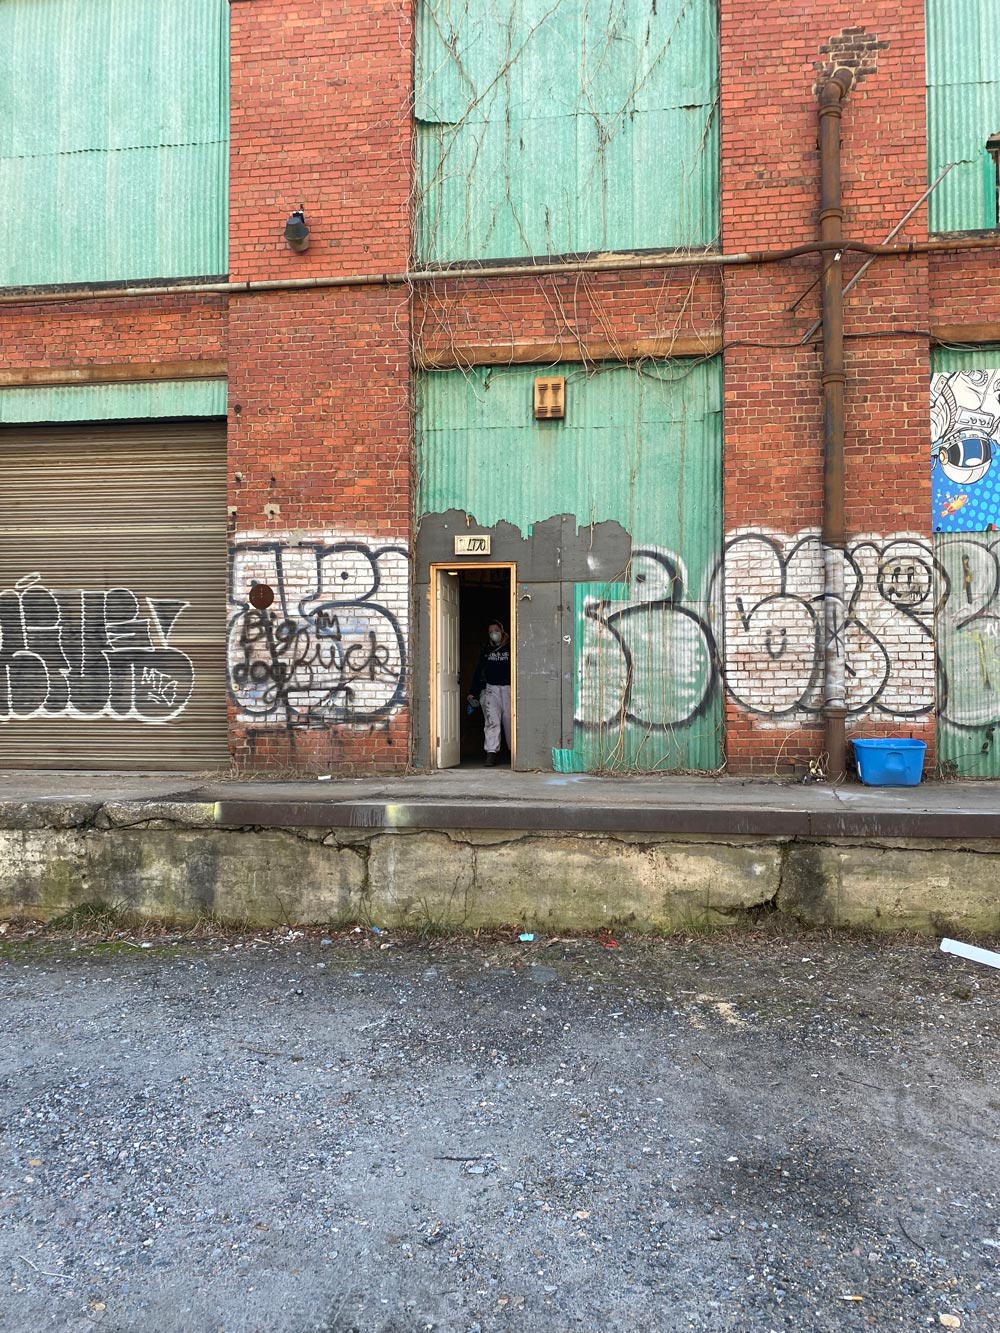 A man in a mask standing in an open doorway of a graffitied industrial building